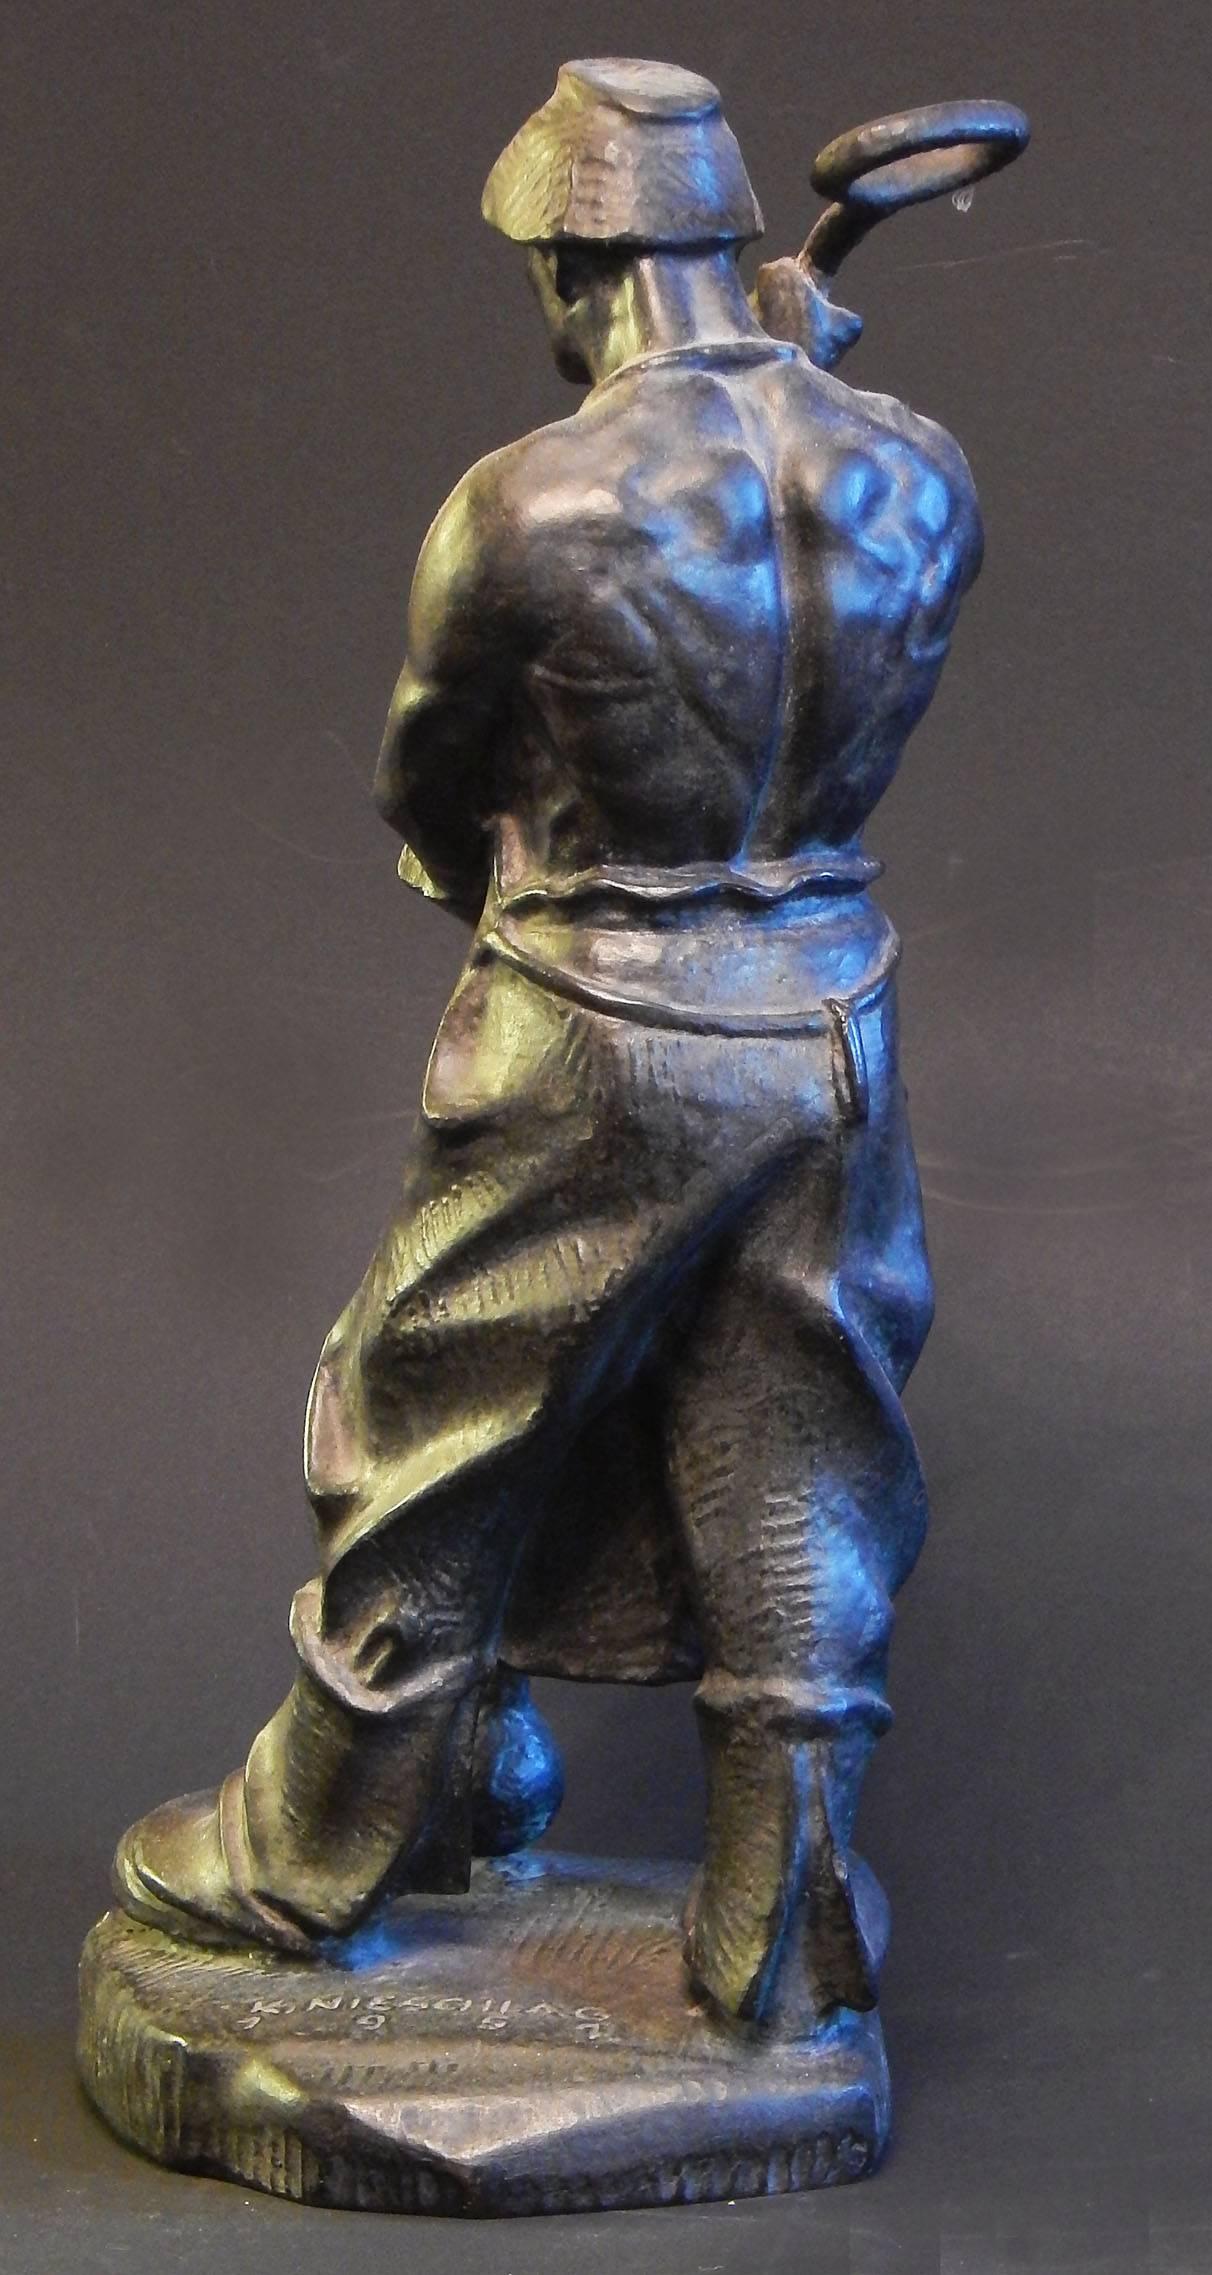 An extremely rare and powerful depiction of an Industrial worker with the tool of his trade at his feet, this steelworker, simply draped in a leather apron and heavy mittens, was sculpted by Karl Nieschlag. The artist studied under Josef Müllner at